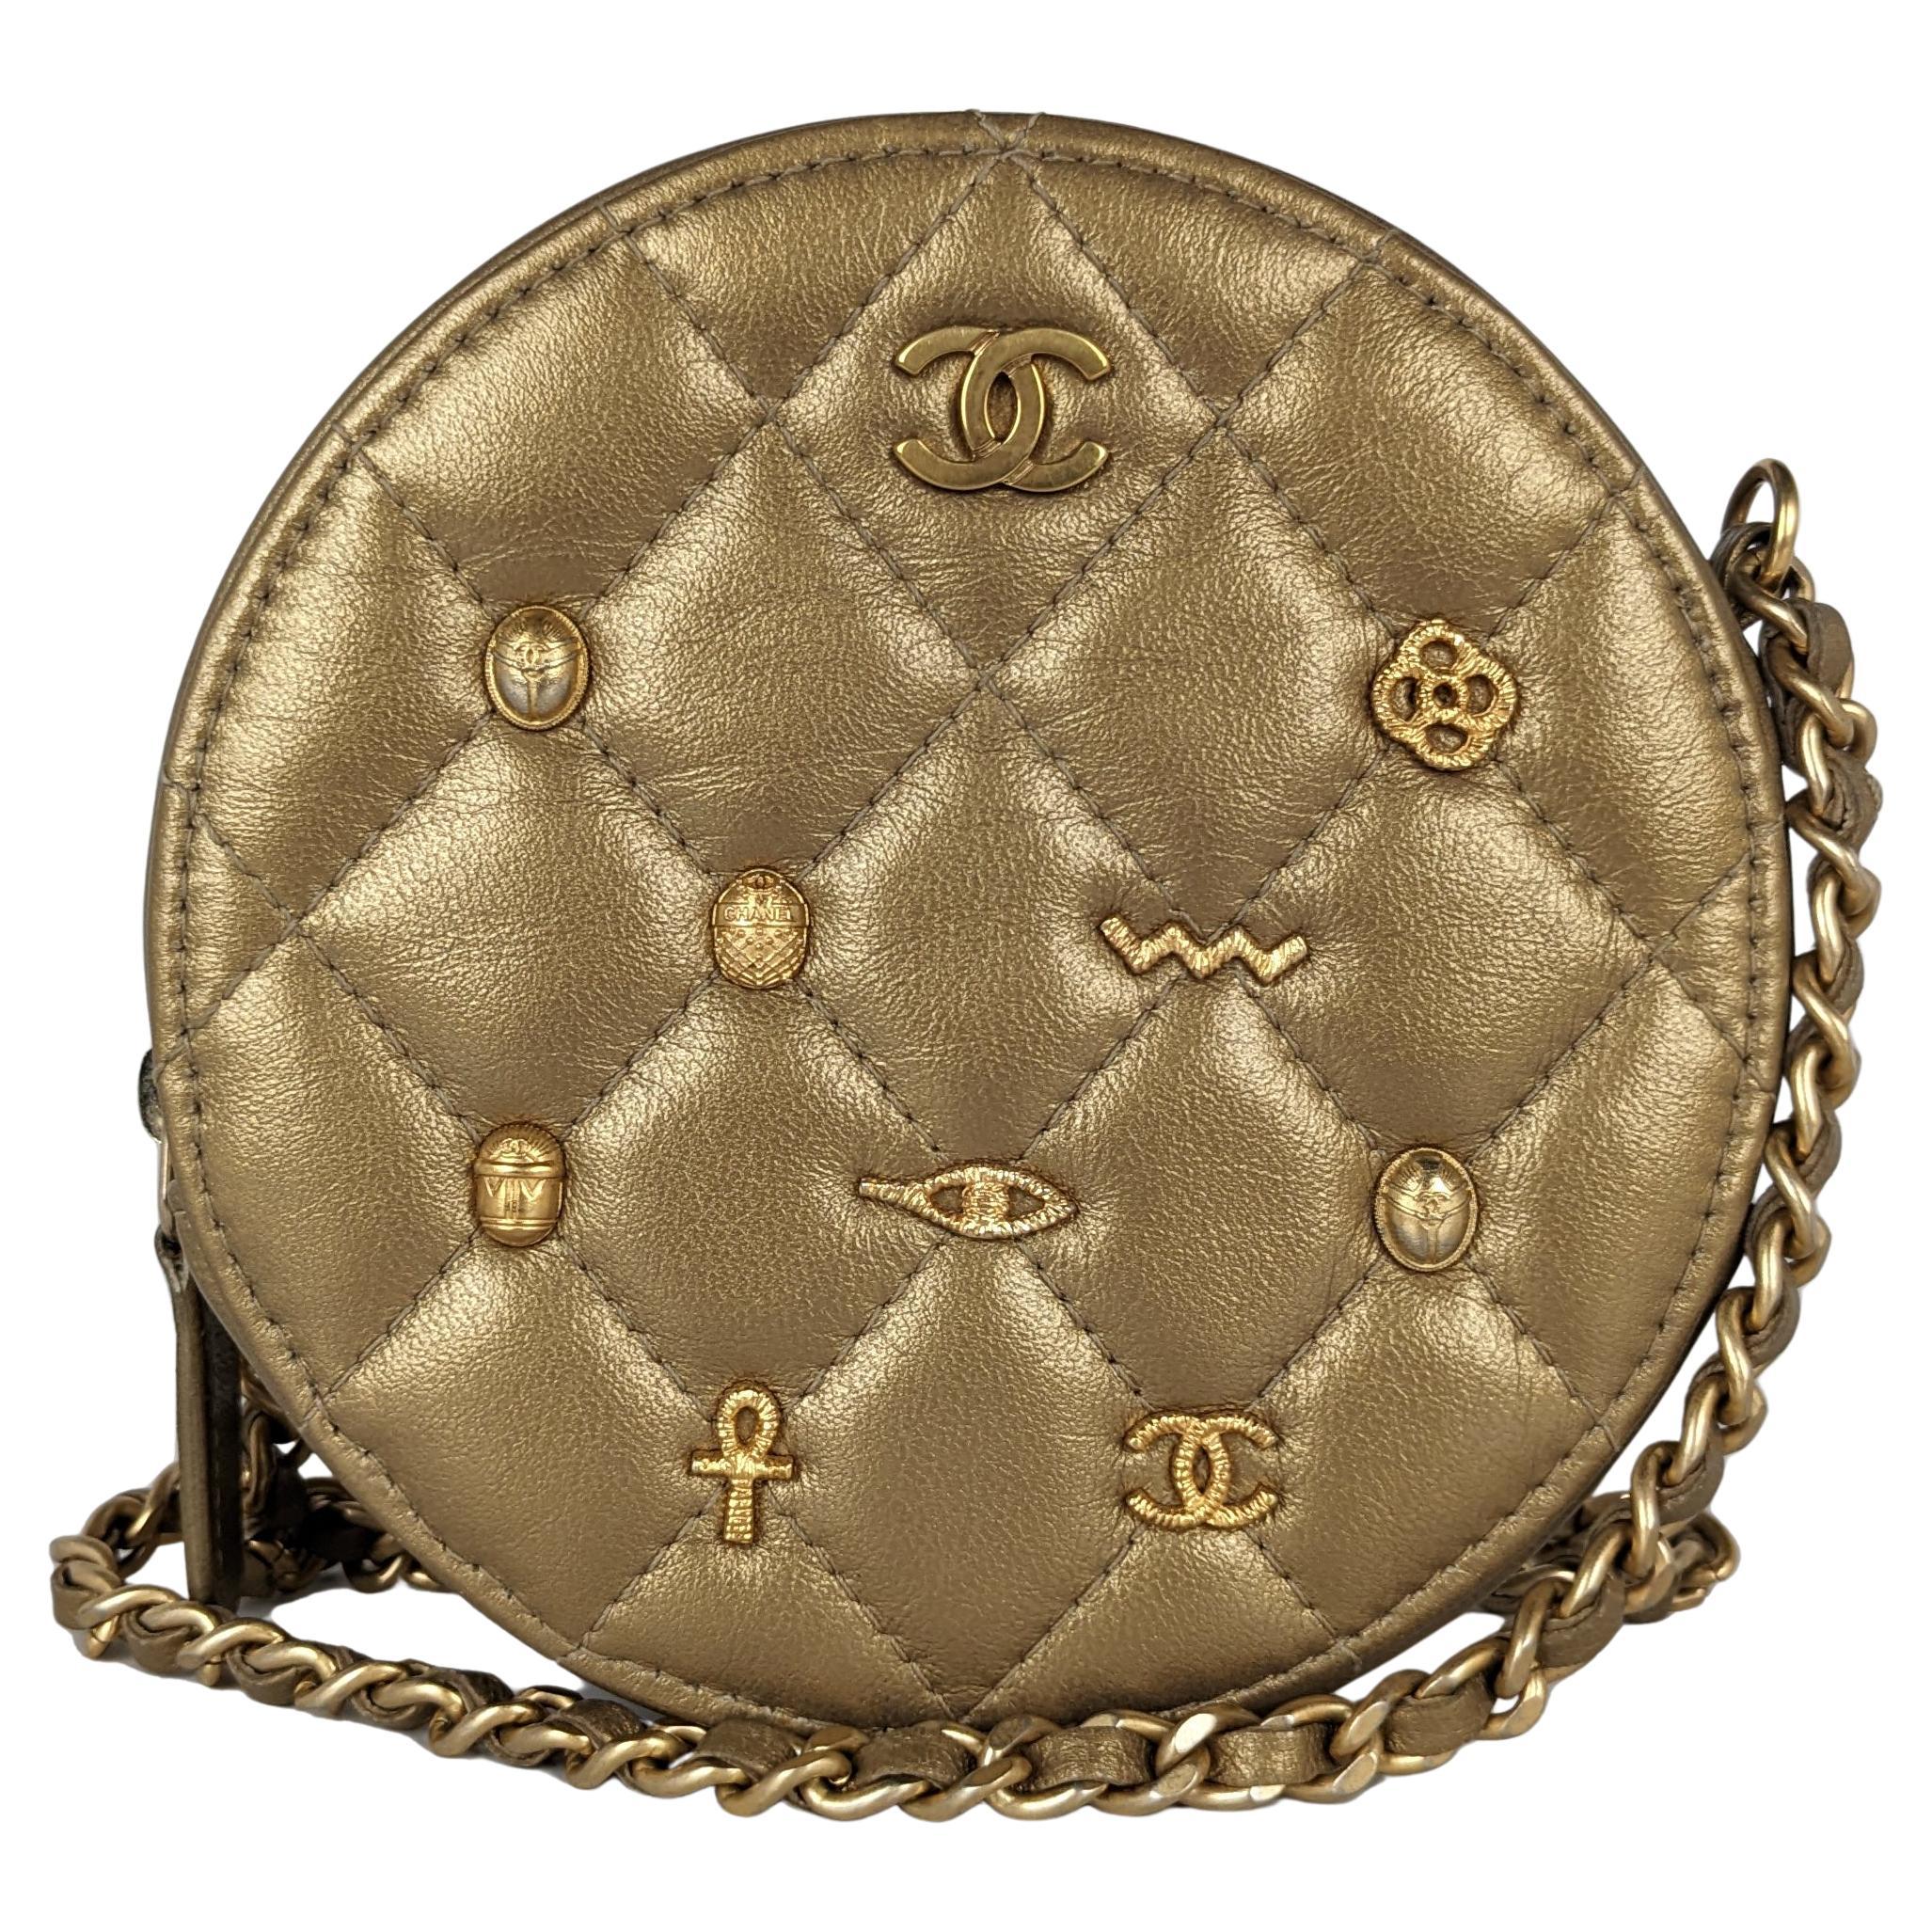 Chanel Metallic Lambskin Quilted Egyptian Amulet Round Clutch With